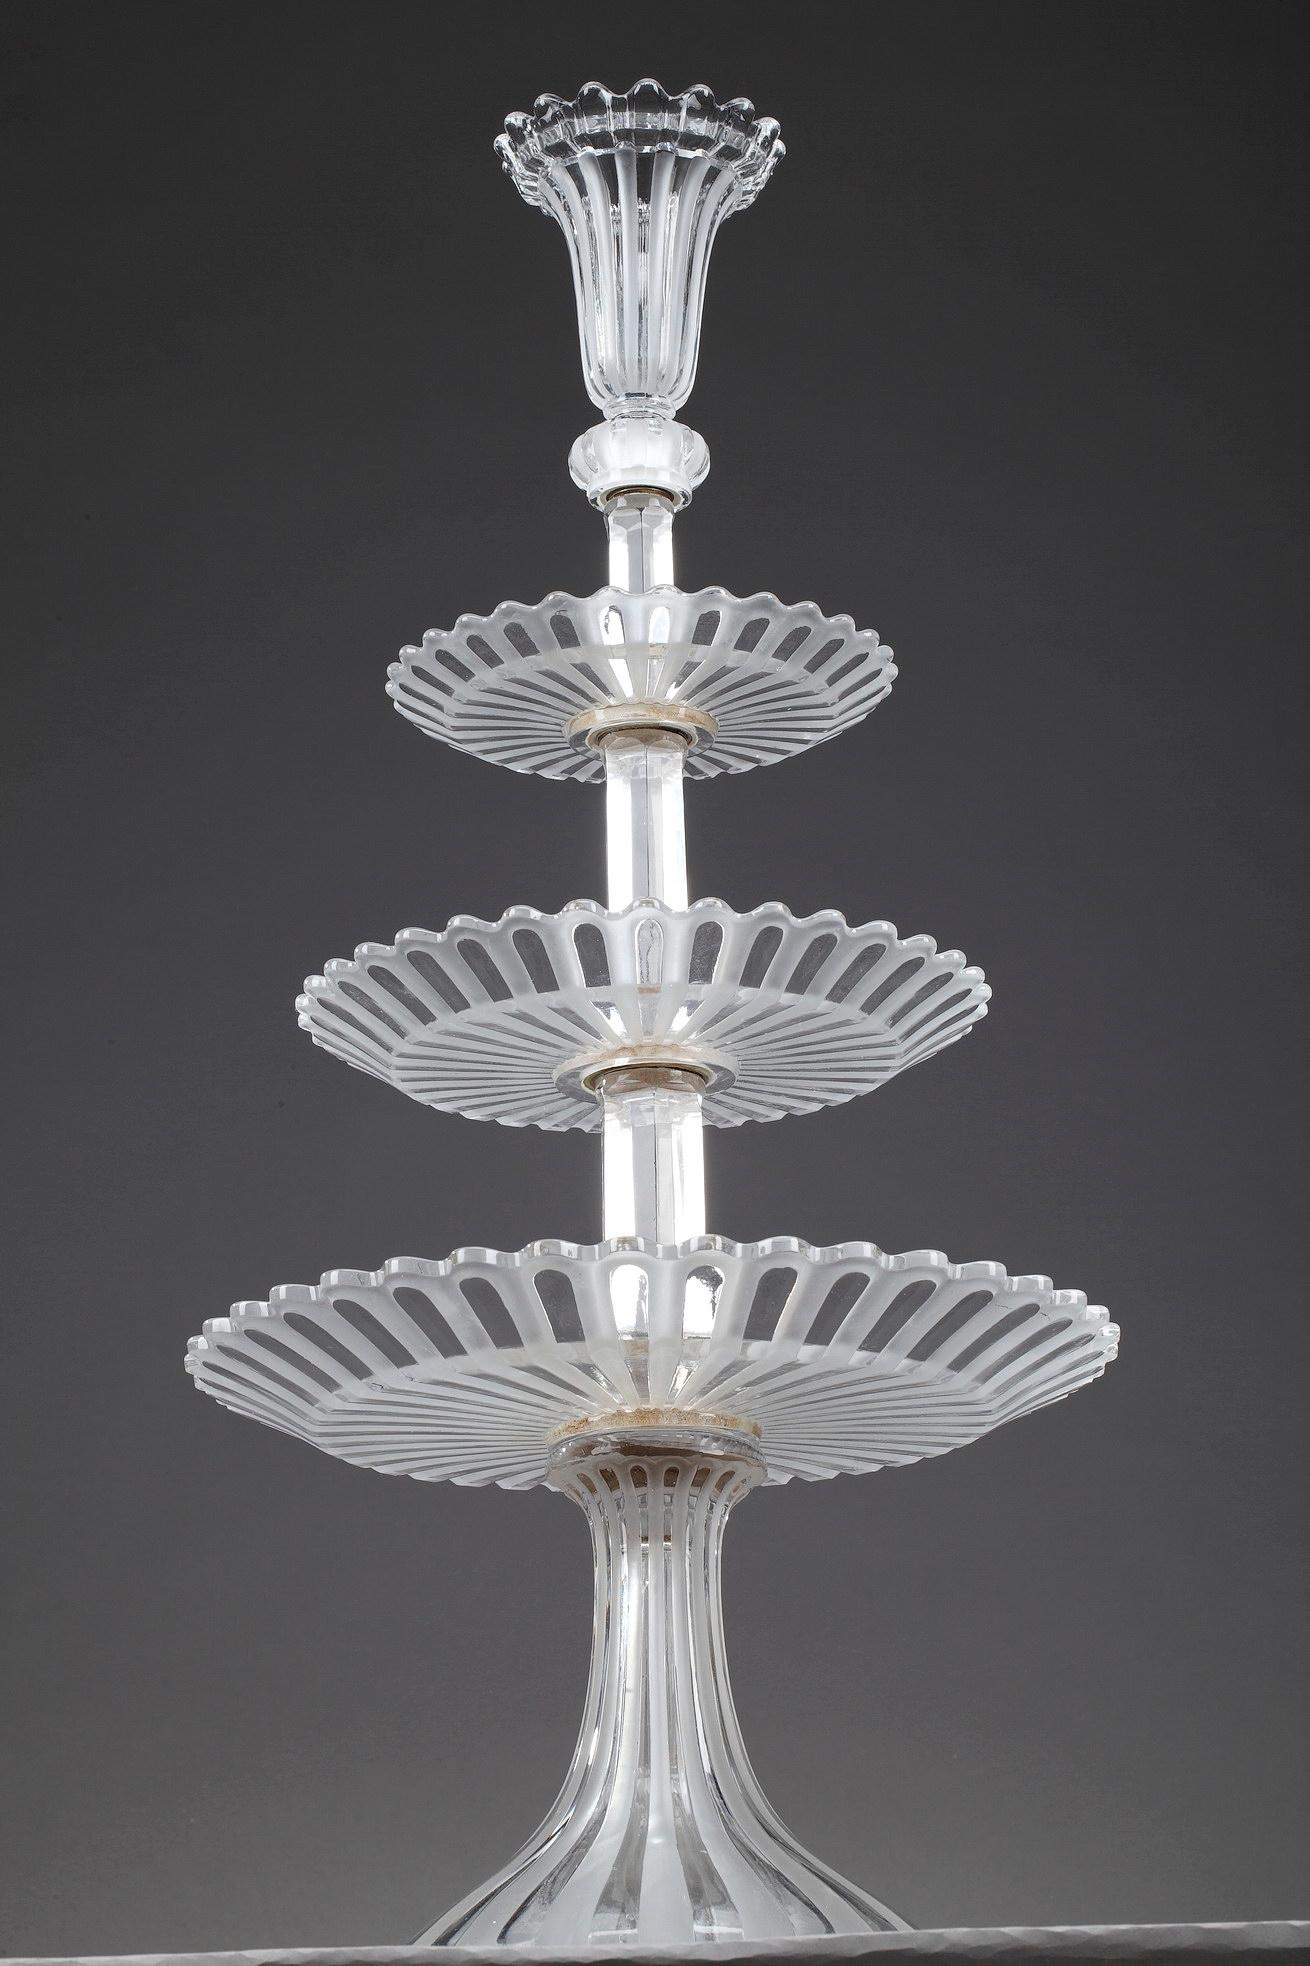 Baccarat Crystal Centerpiece, Late 19th Century Period 1